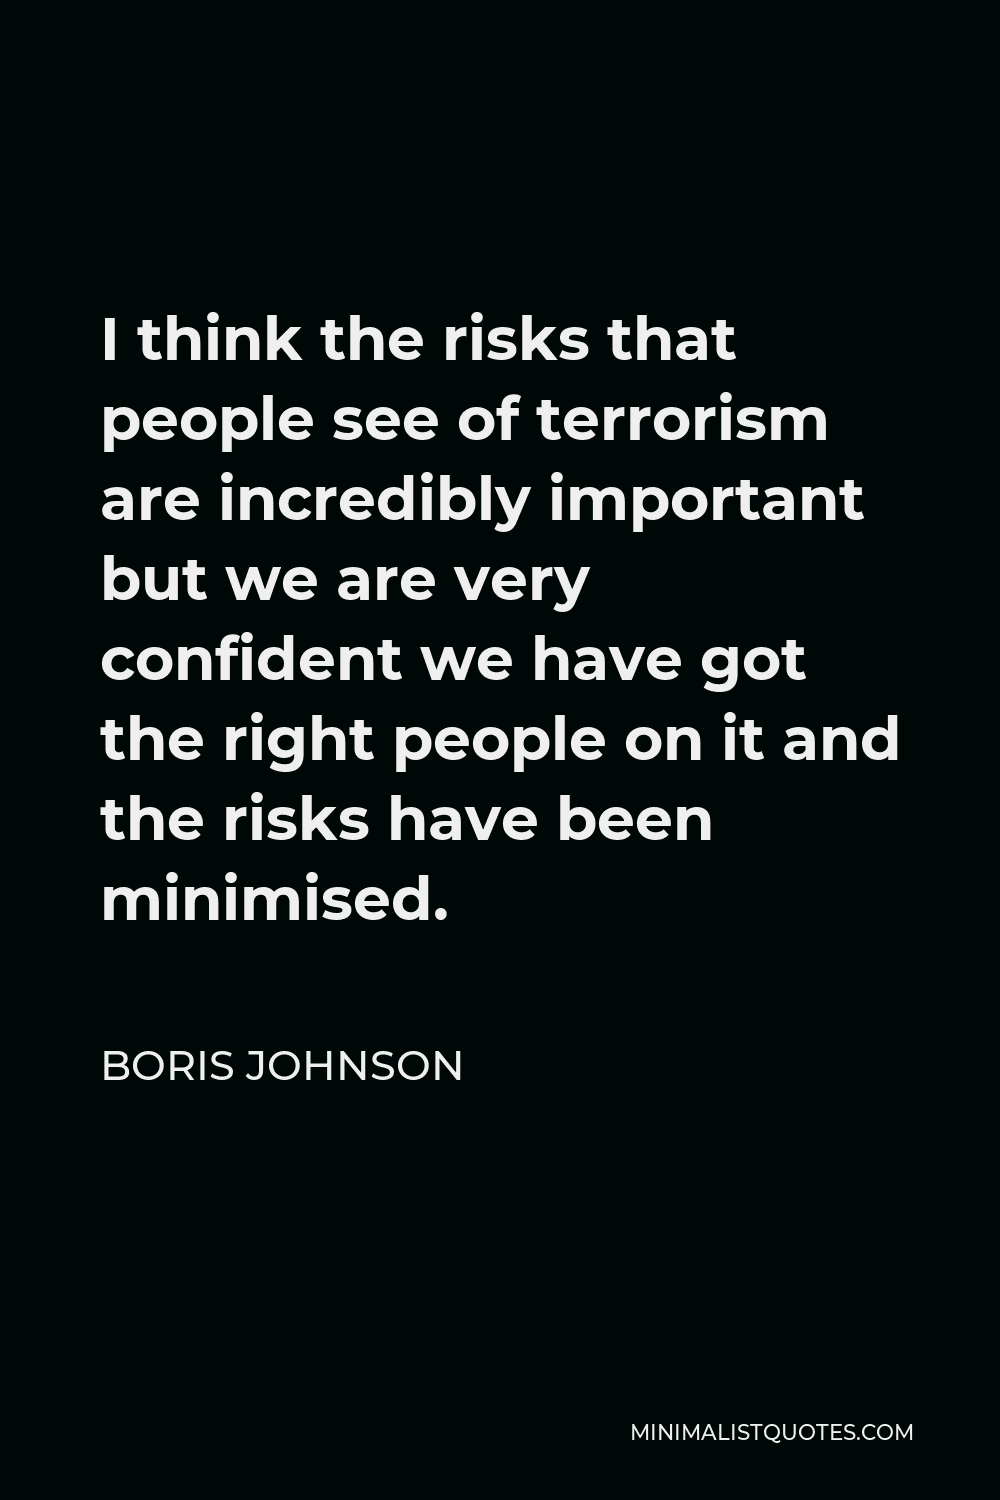 Boris Johnson Quote - I think the risks that people see of terrorism are incredibly important but we are very confident we have got the right people on it and the risks have been minimised.